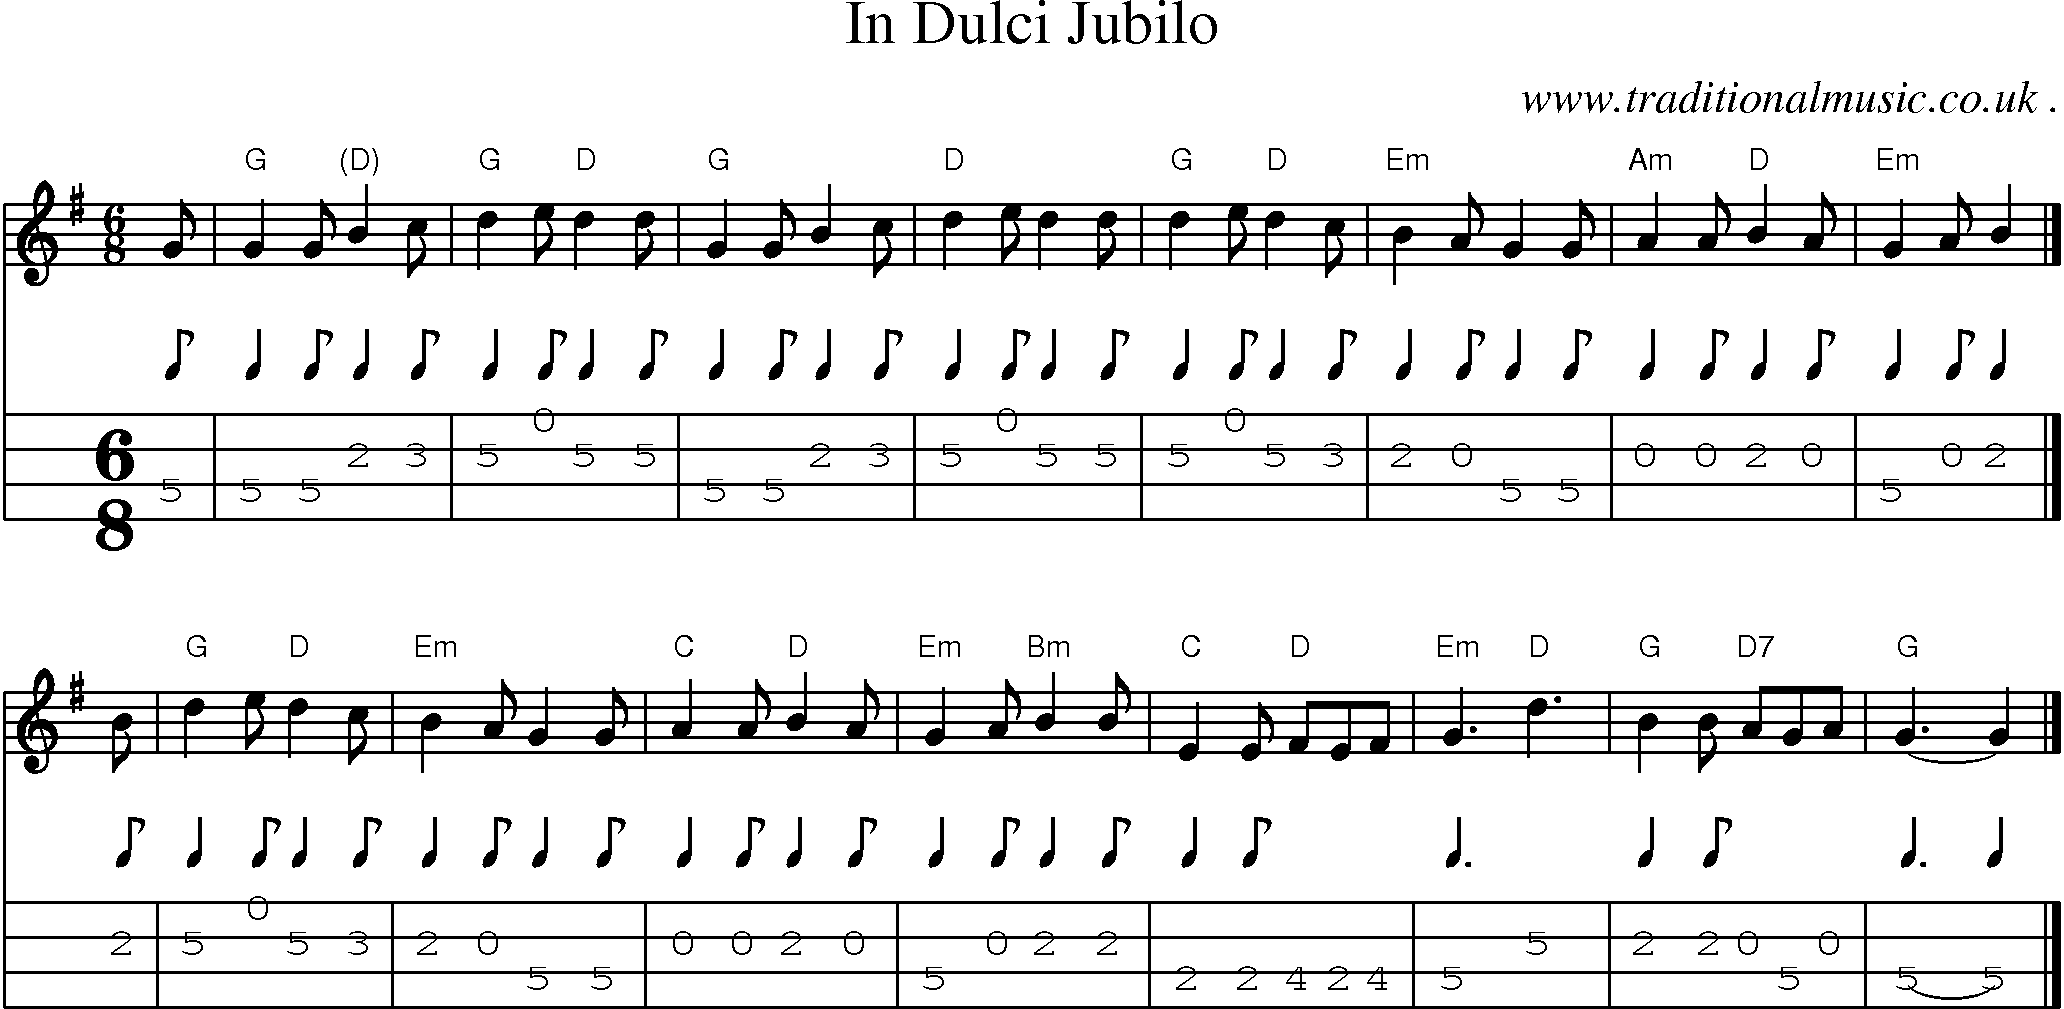 Sheet-music  score, Chords and Mandolin Tabs for In Dulci Jubilo